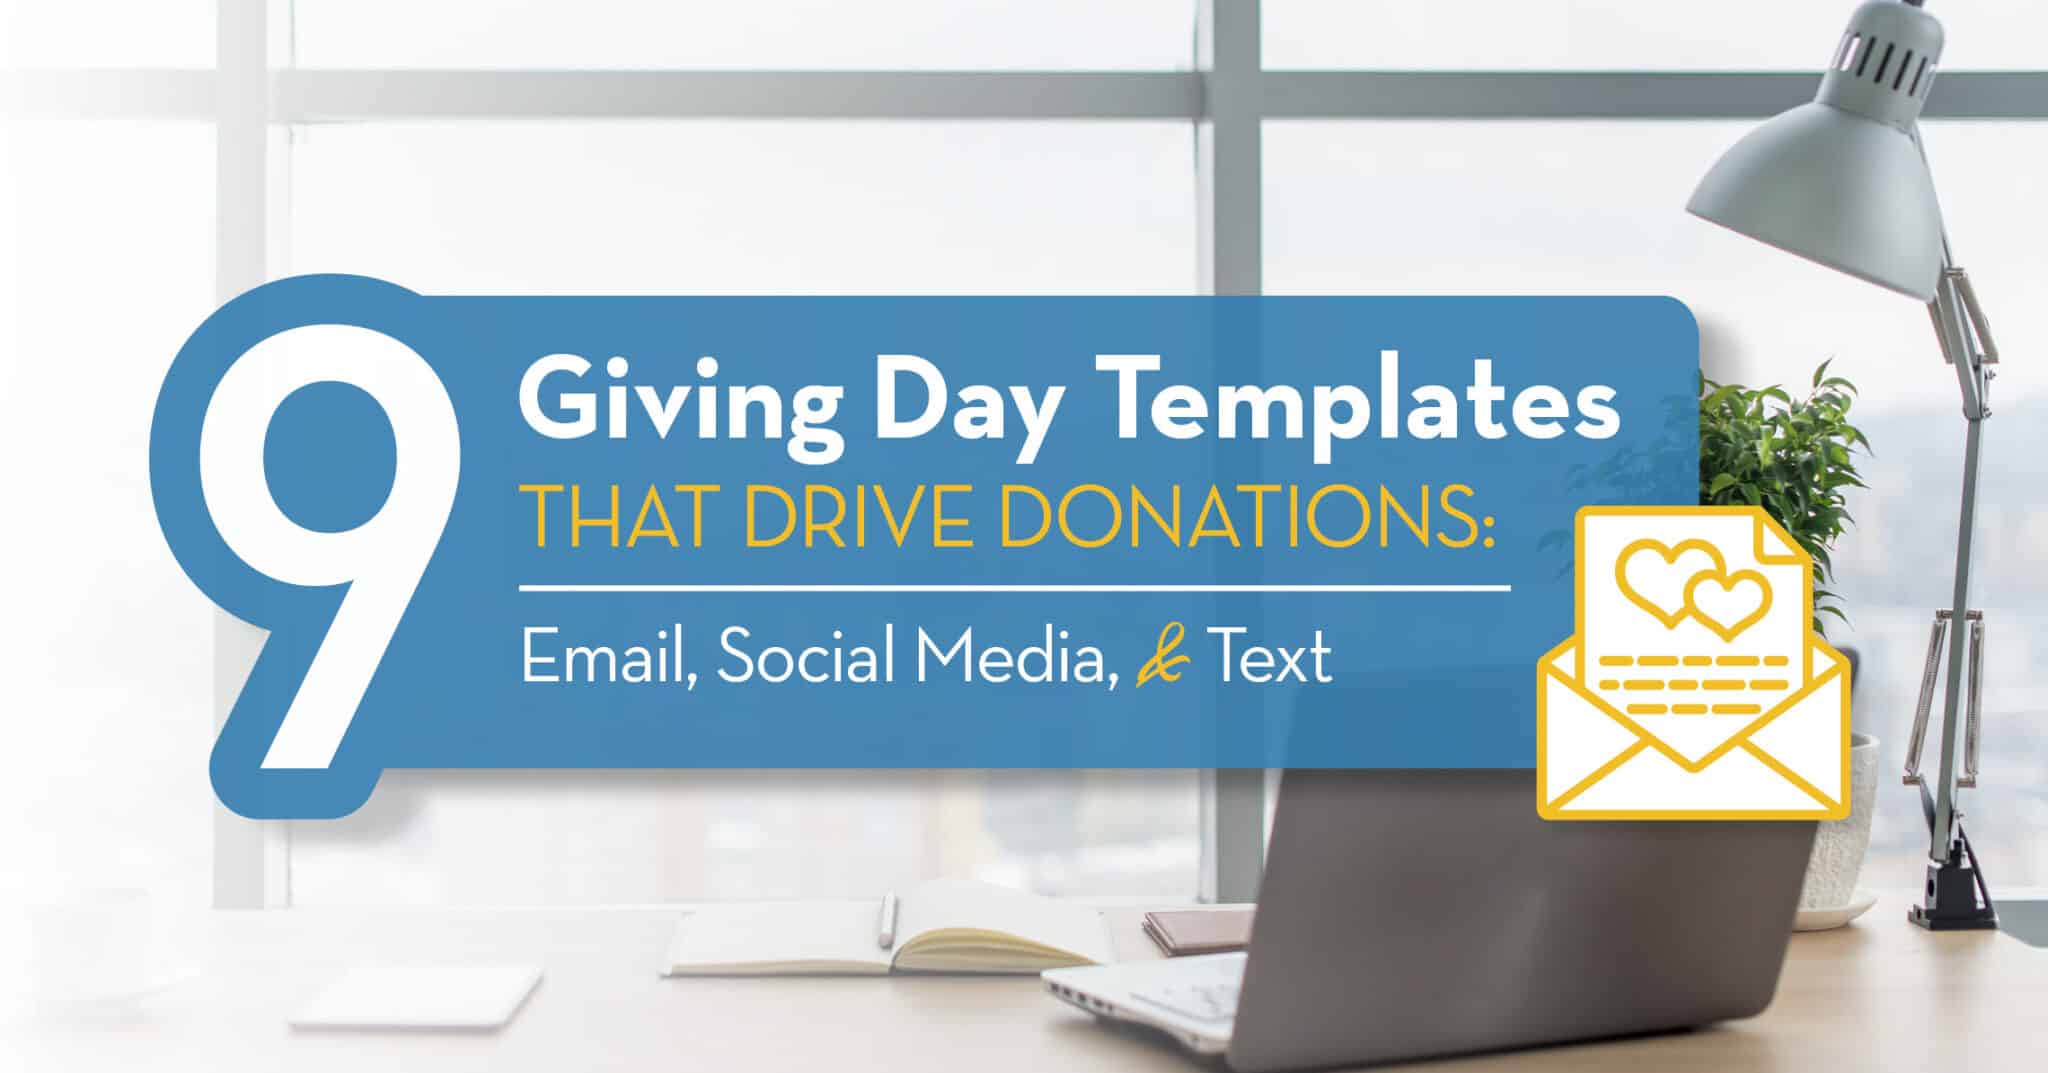 9 giving day templates-web